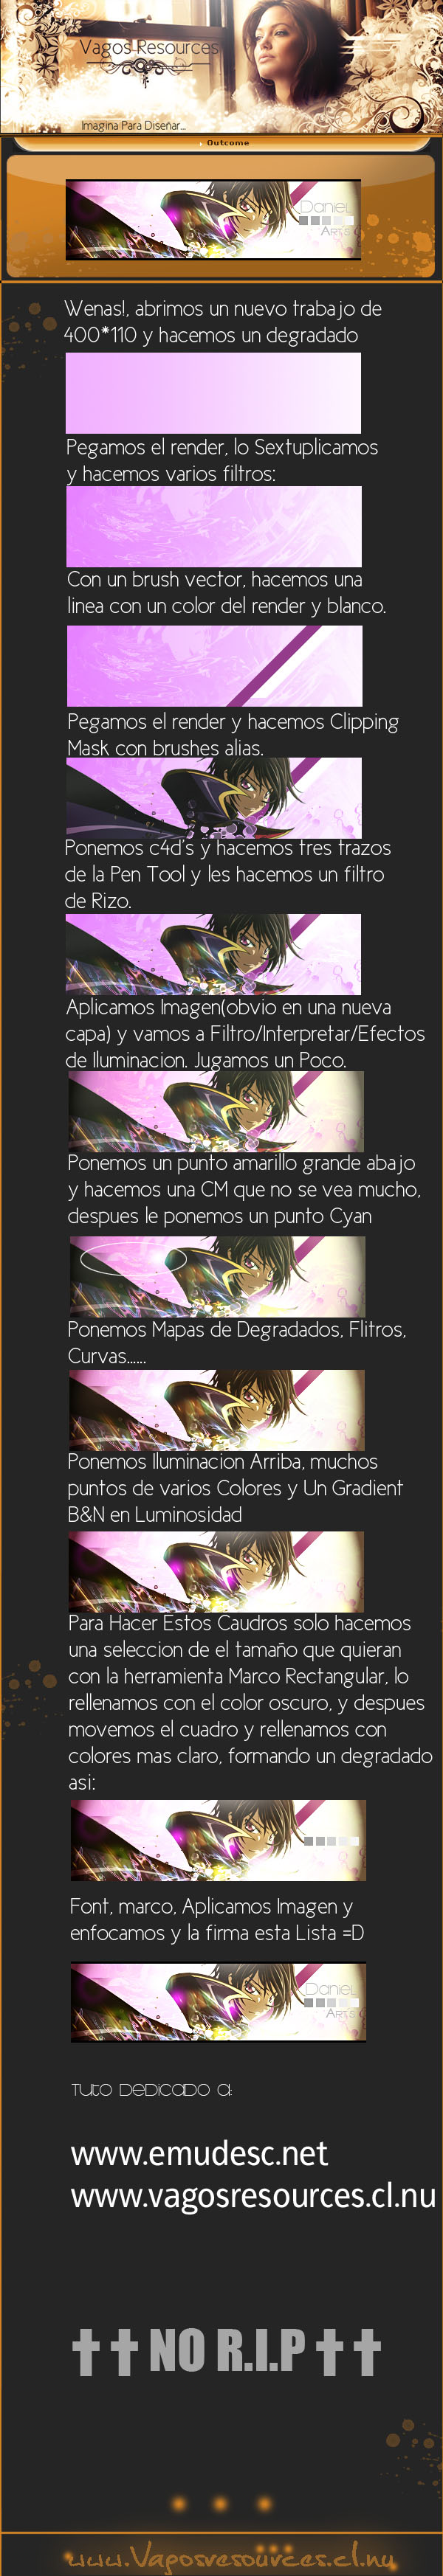 Lelouch_Revelation_Tag_Tut_by_sikenX.jpg